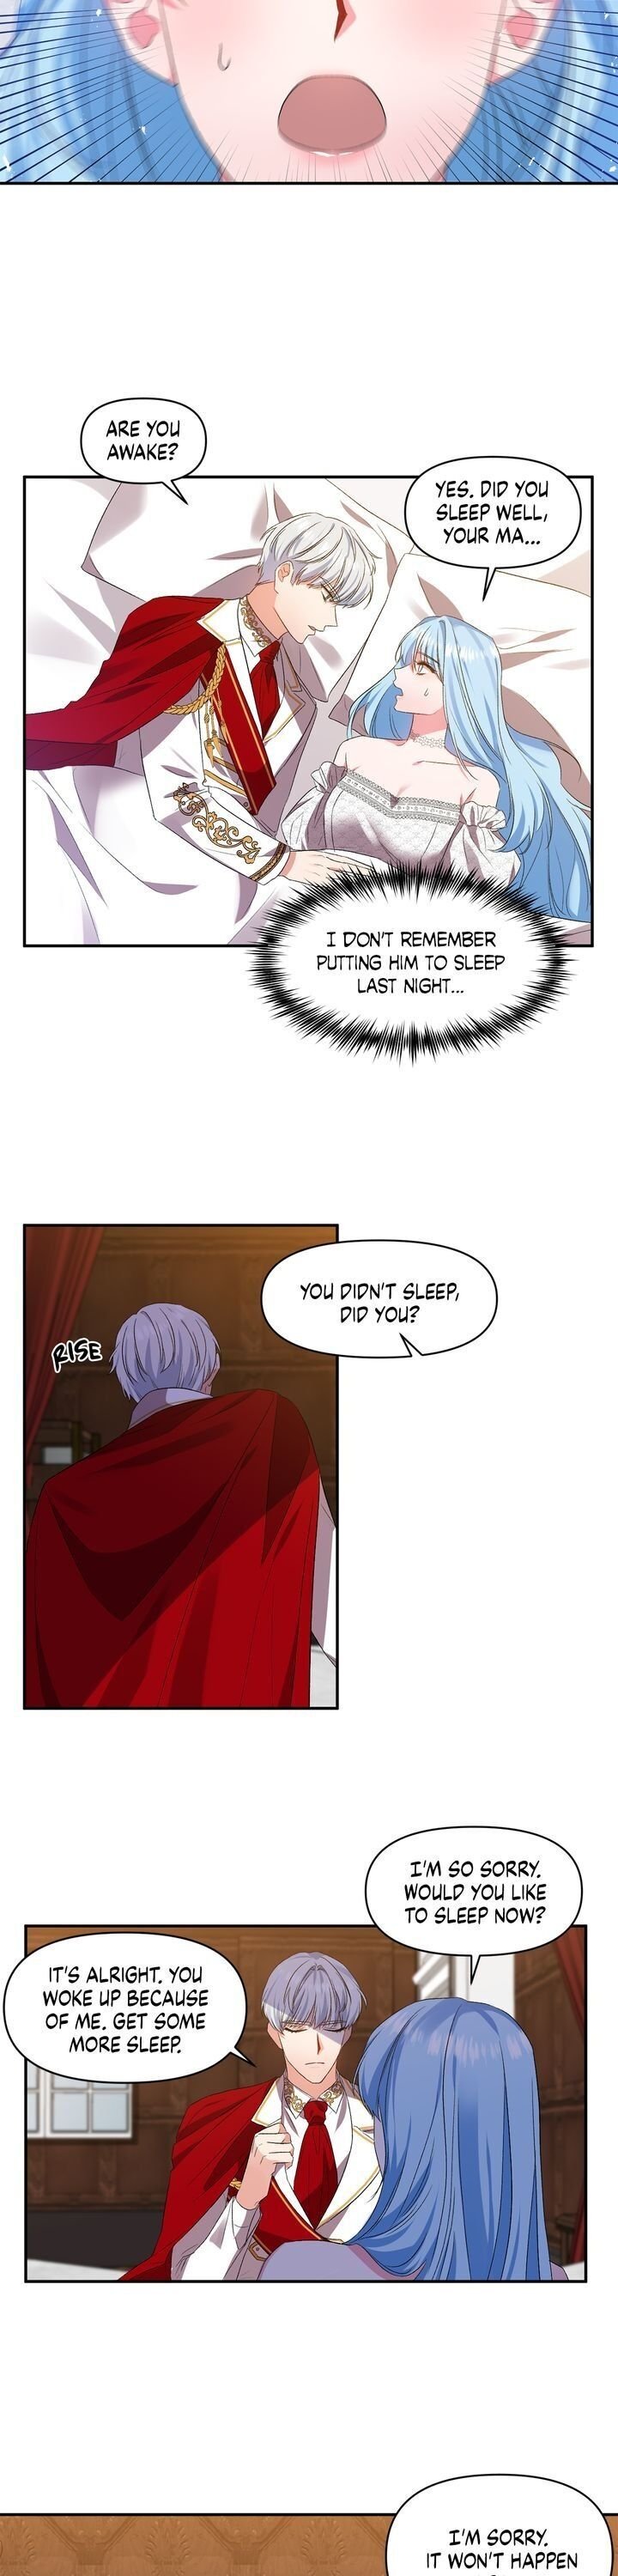 I’ll Do That Marriage Chapter 15 - Page 31